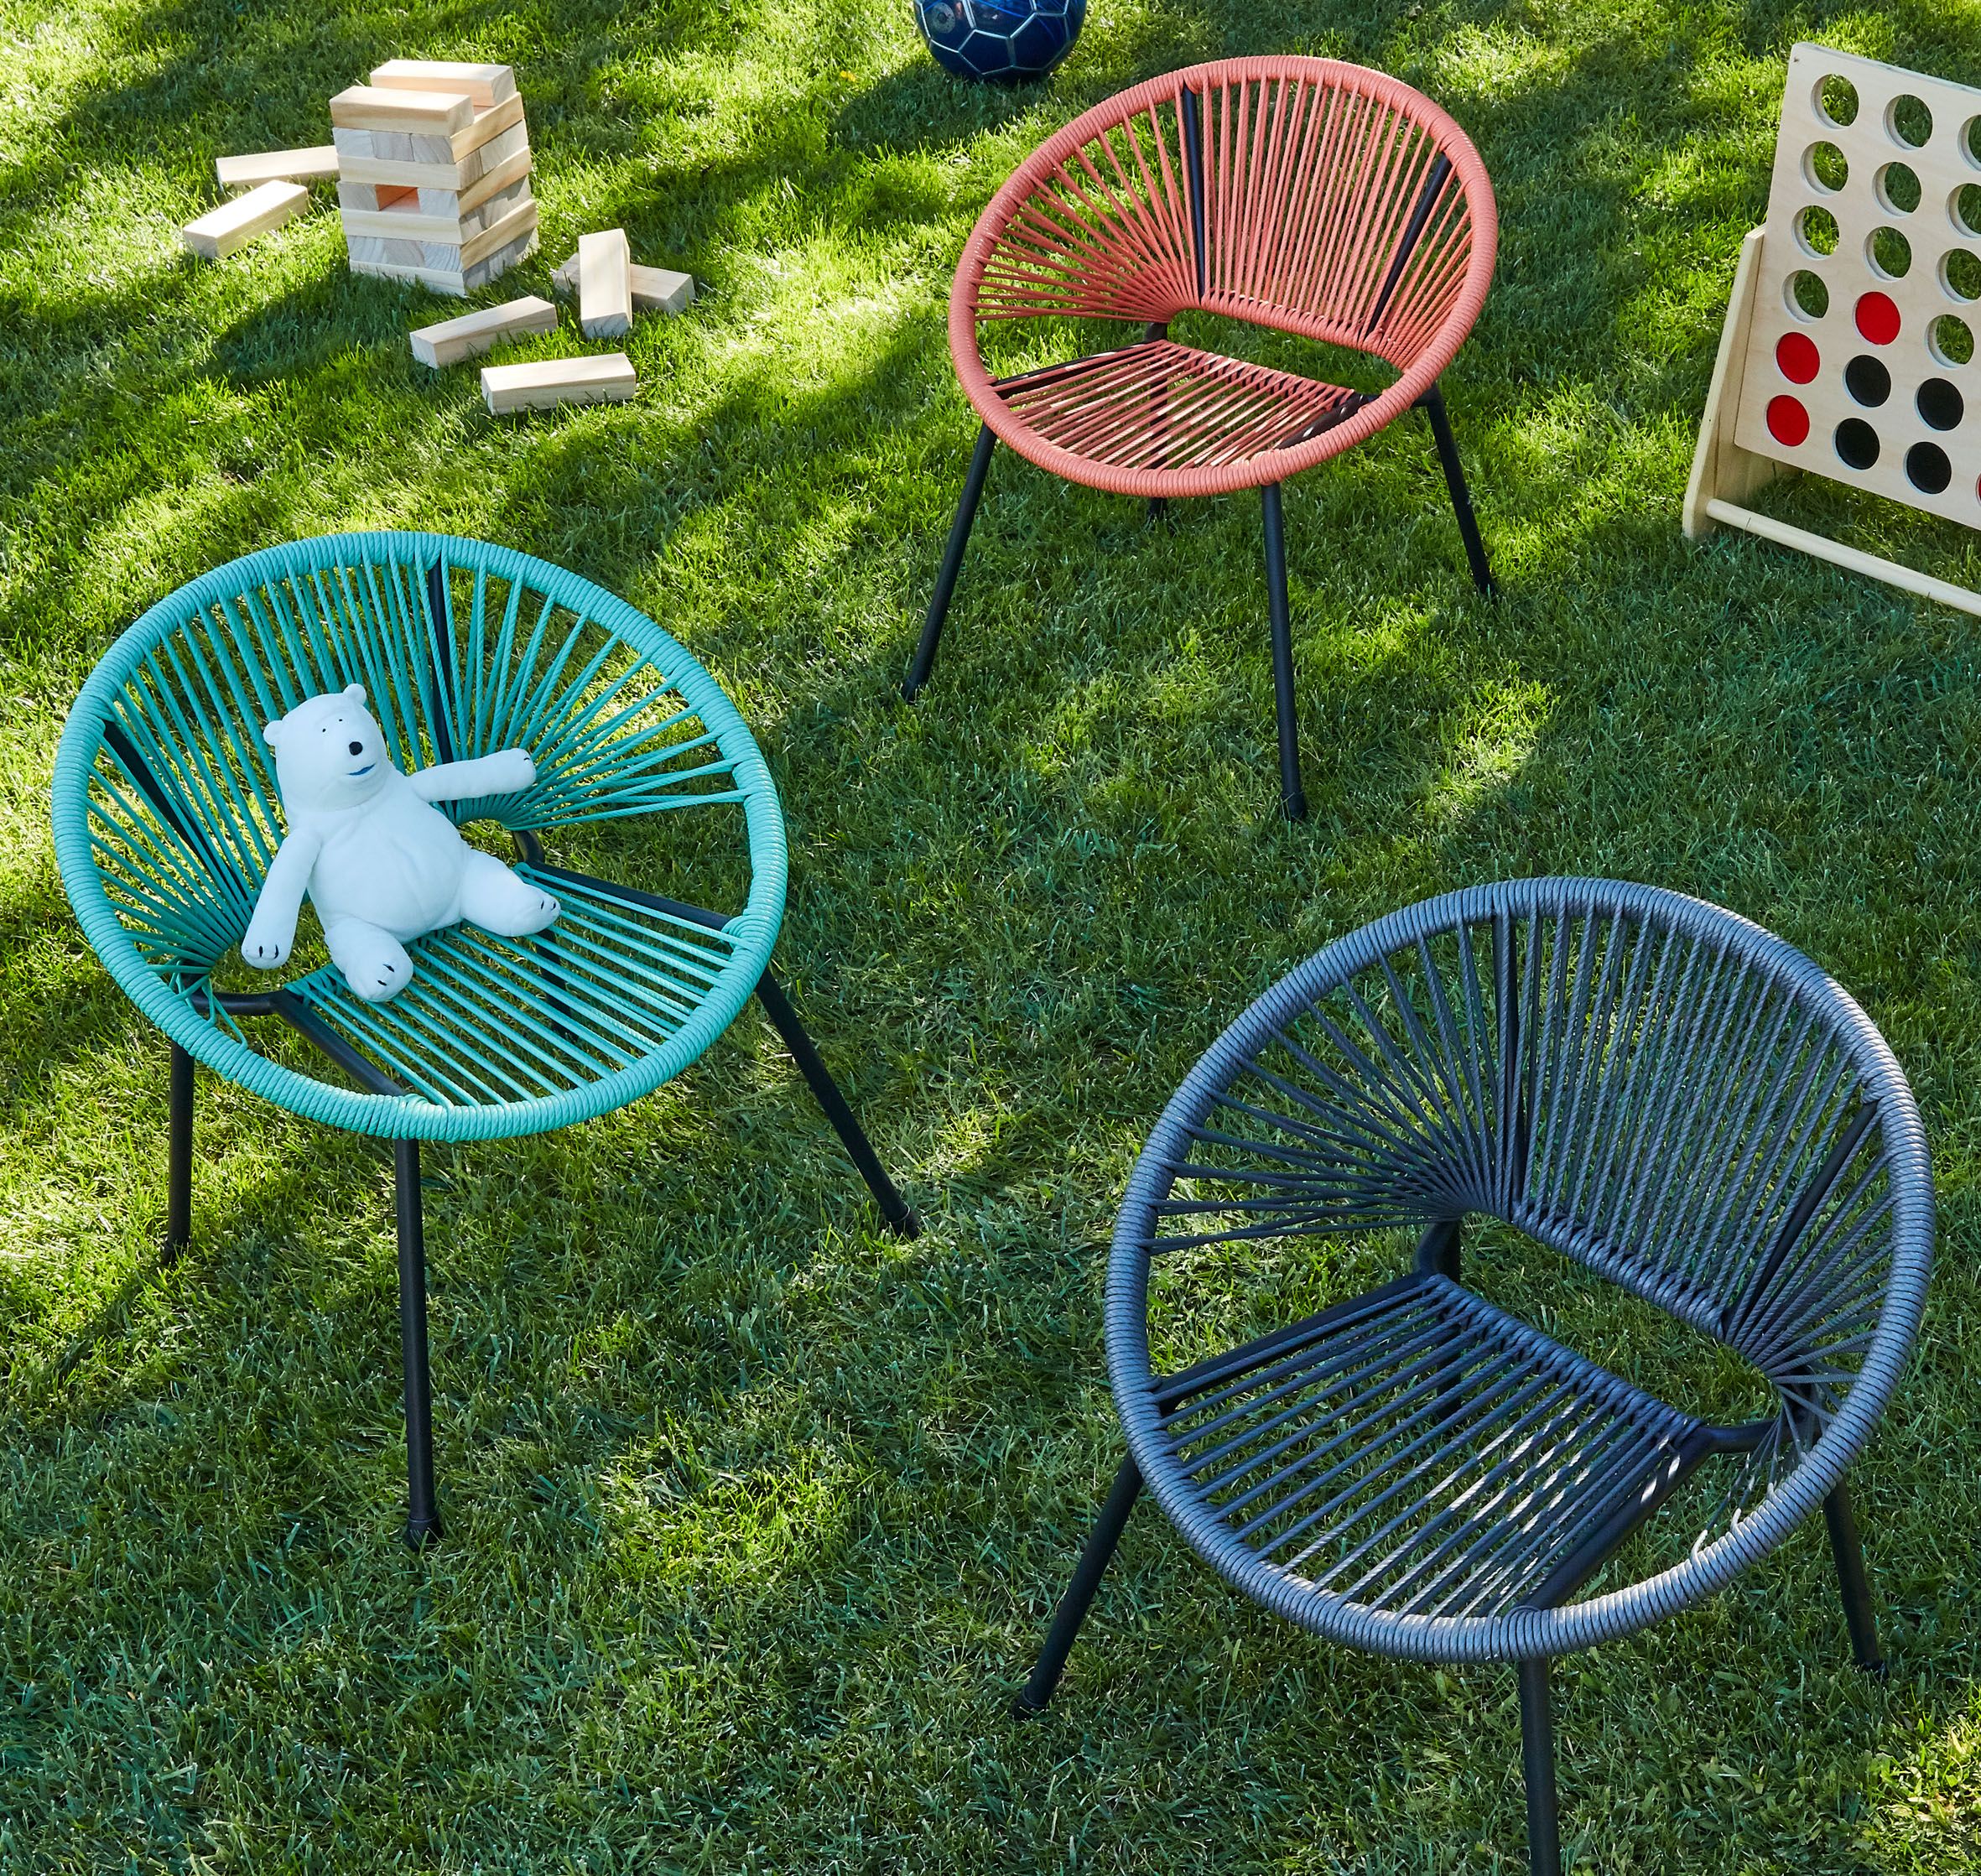 Garden chairs and games